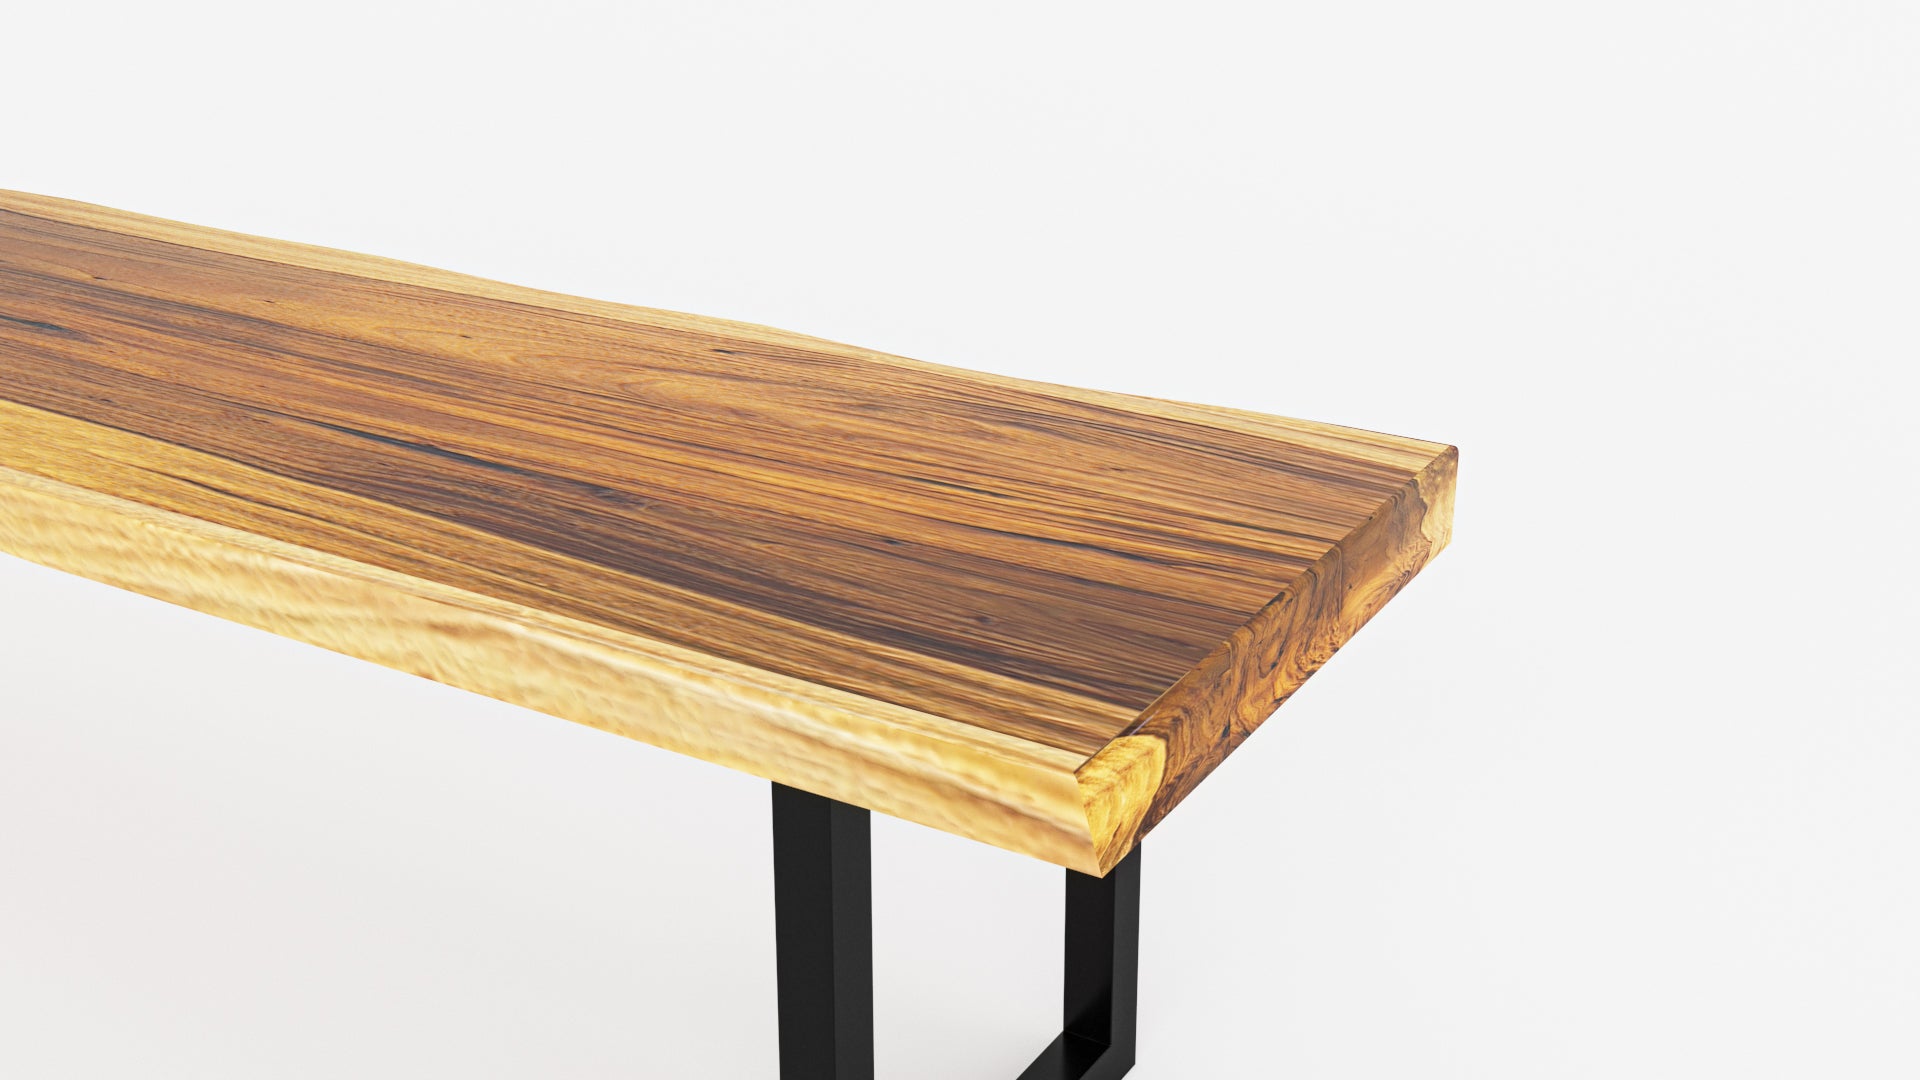 Wood As Your Main Material Of Furniture